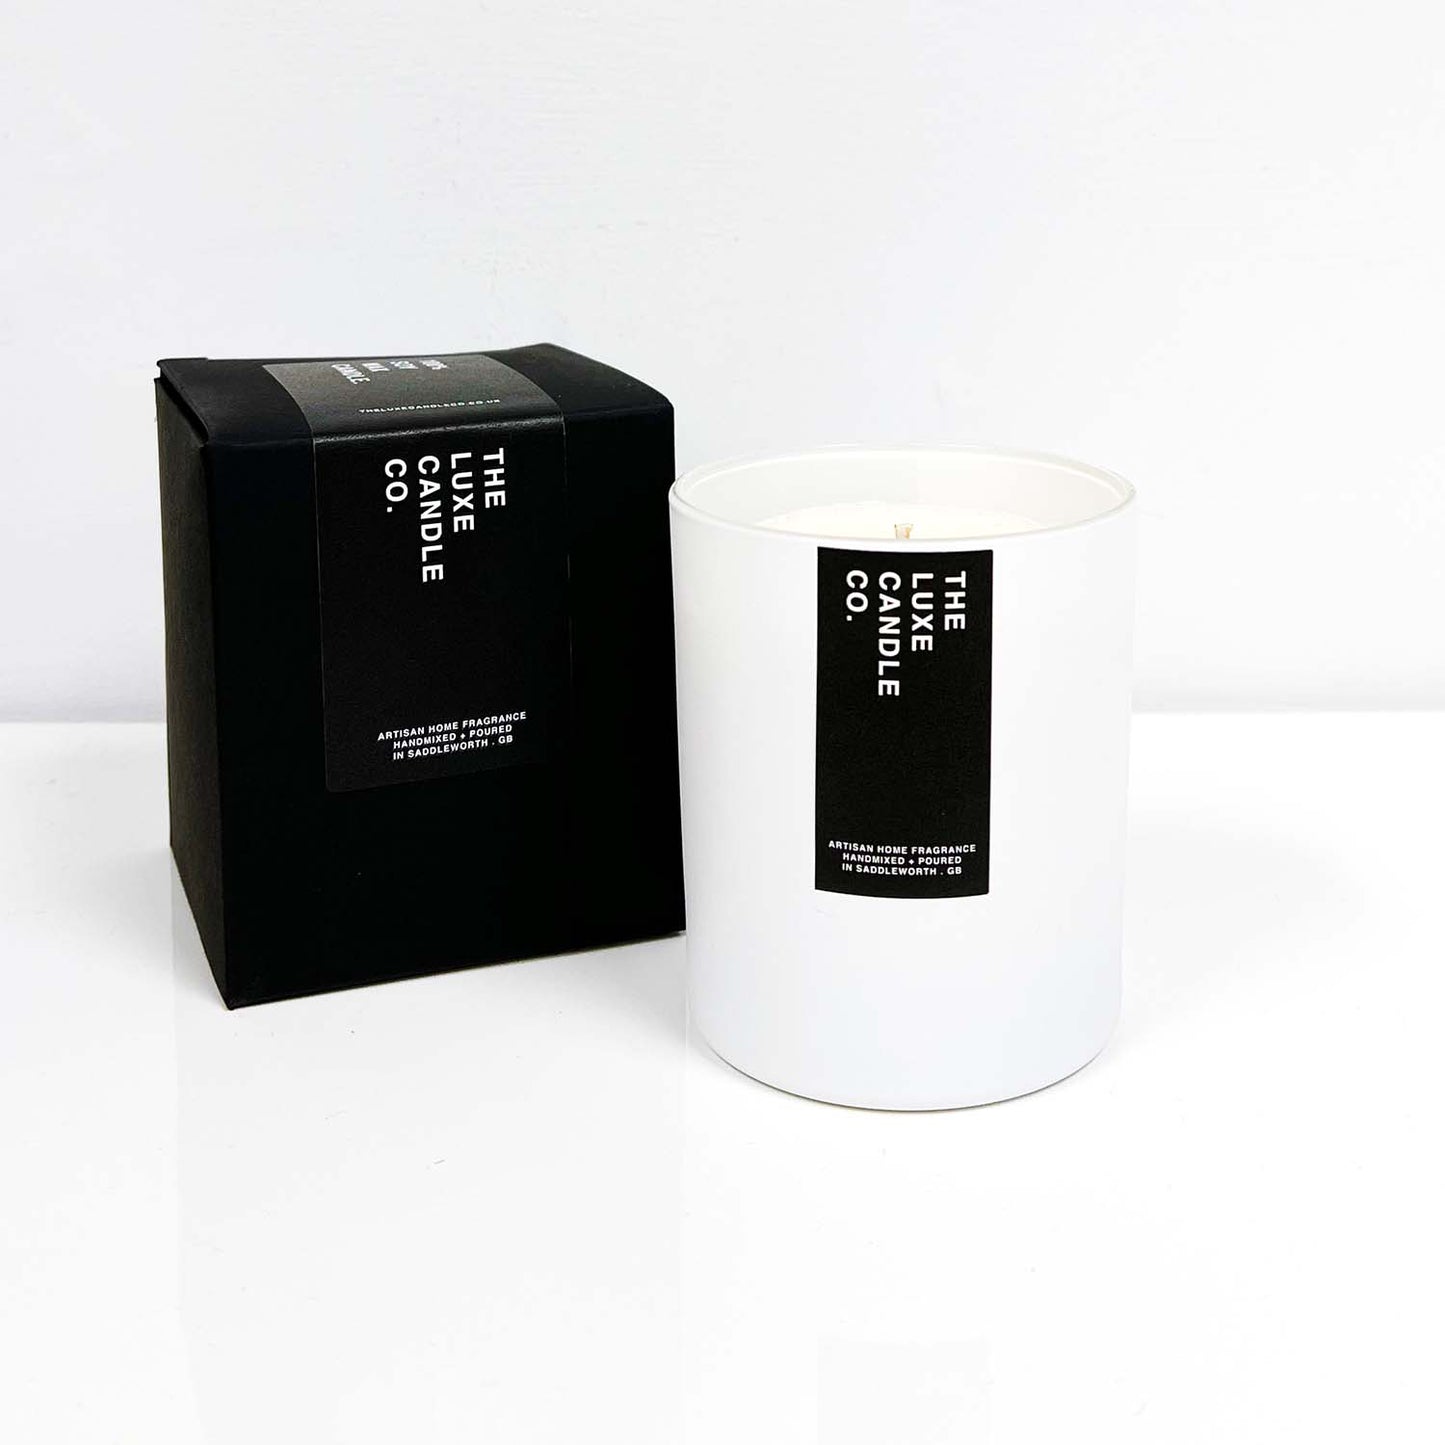 Clack and white coconut candle